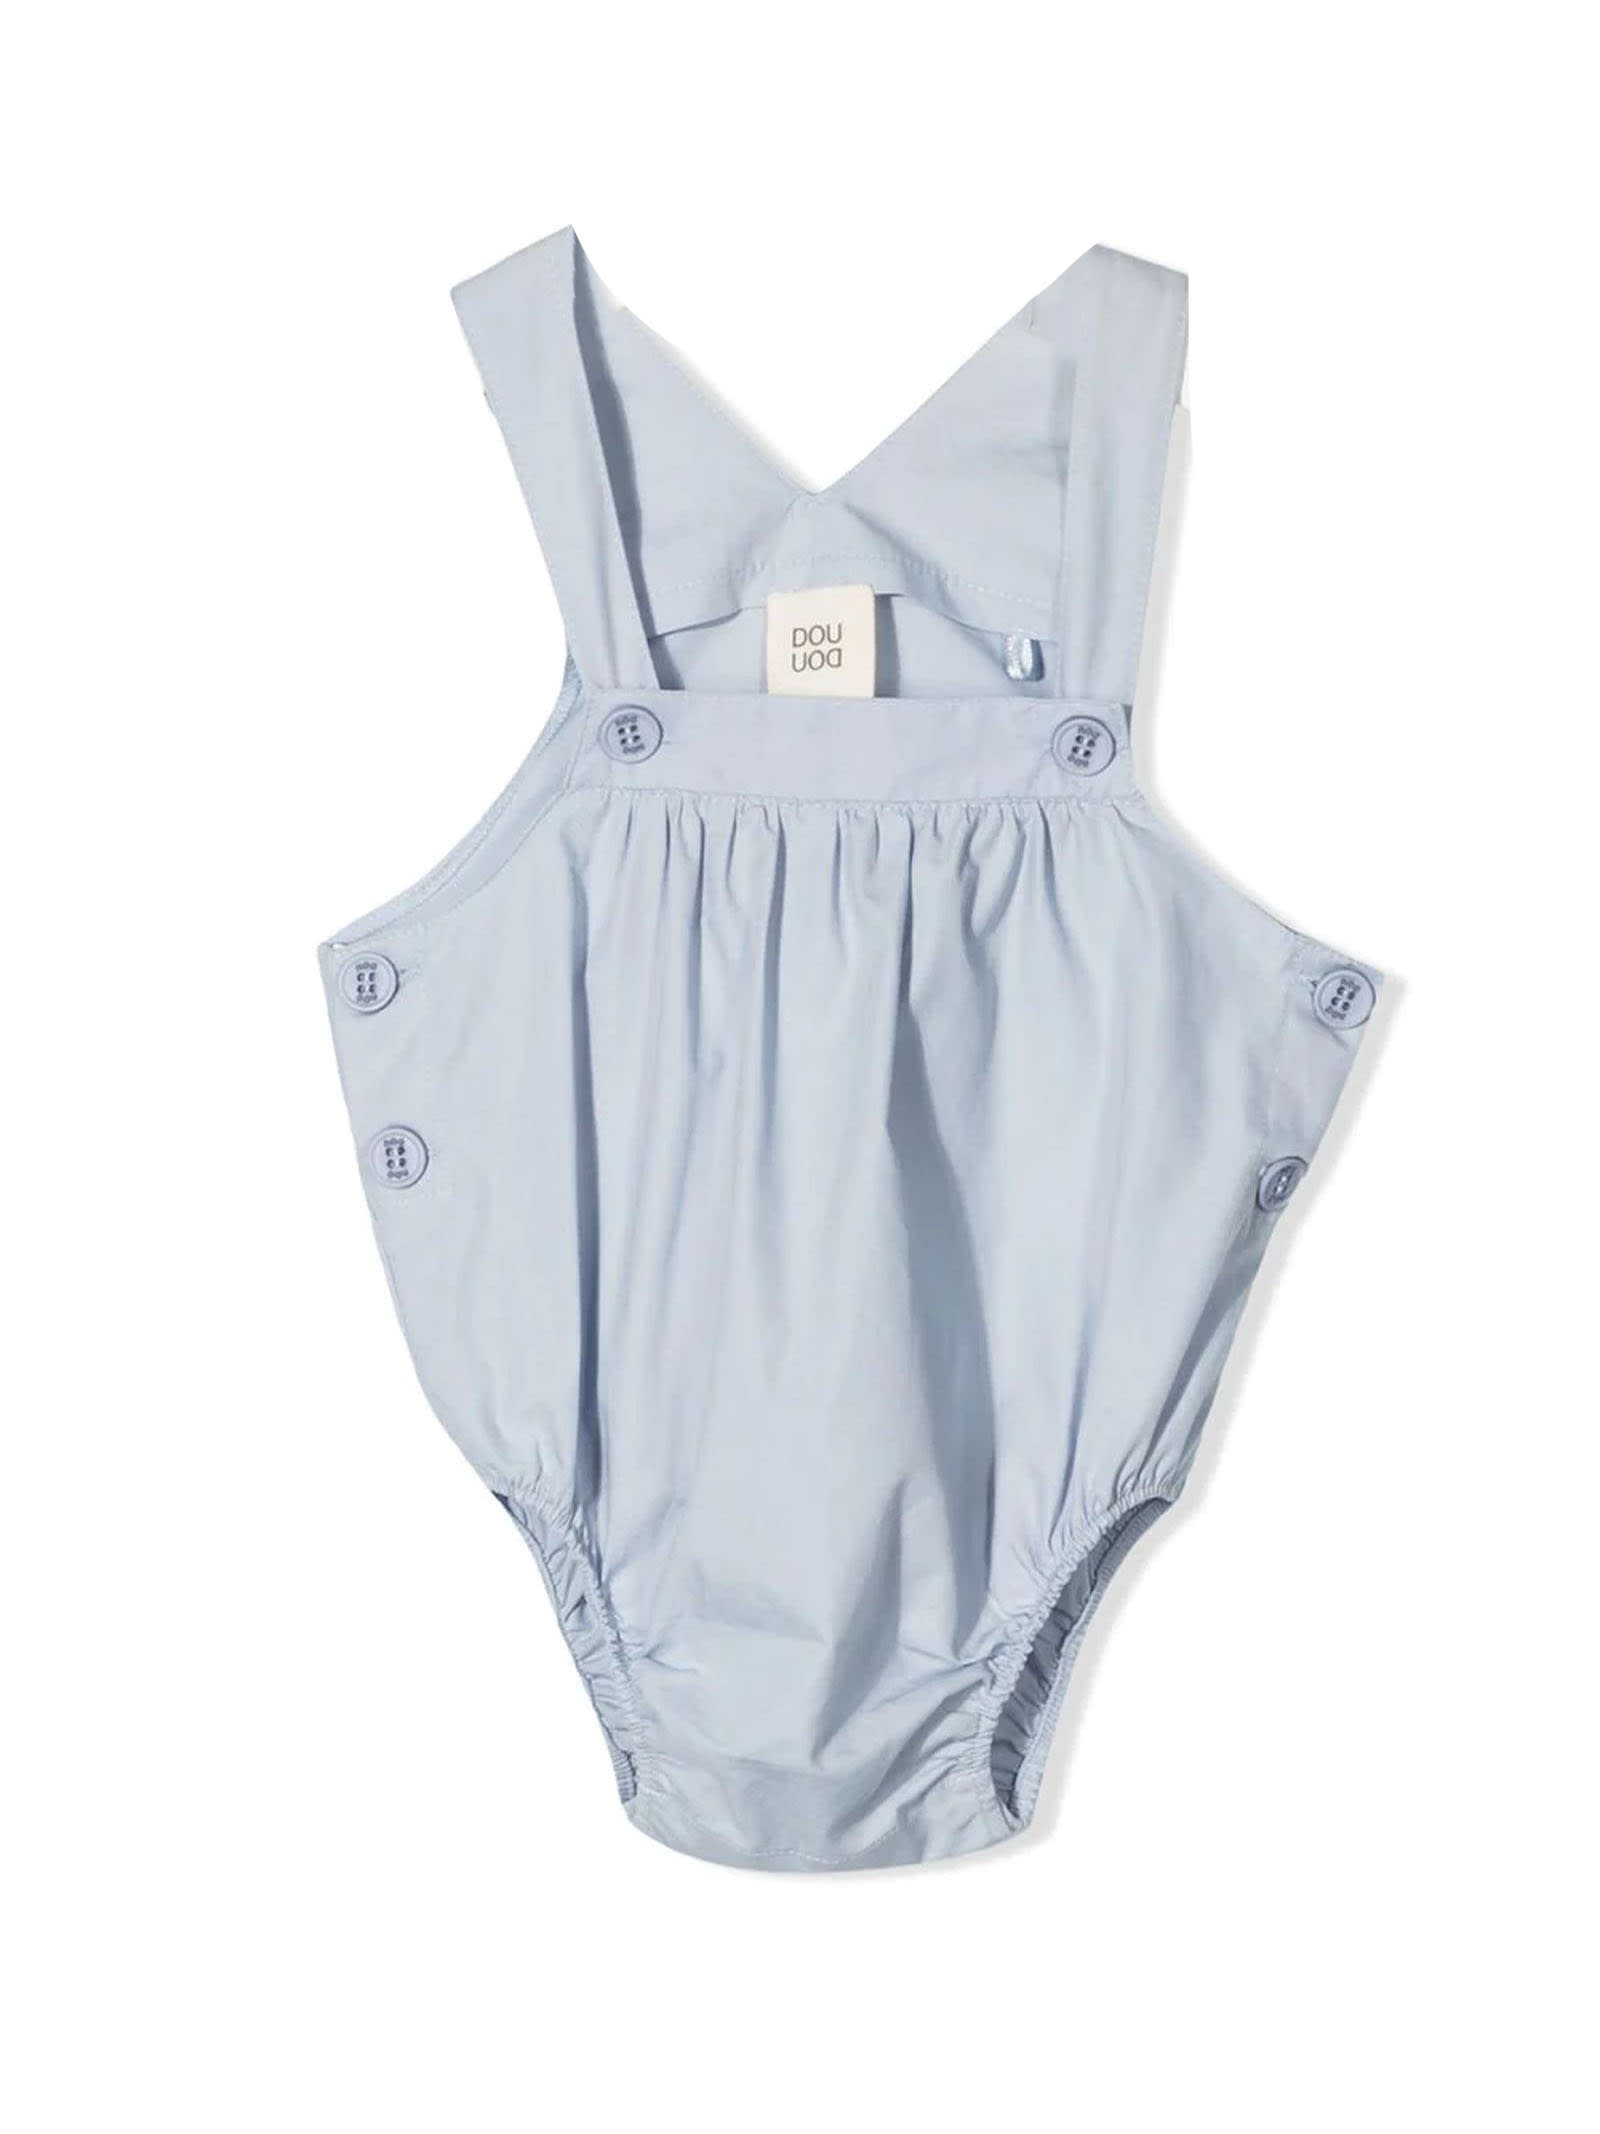 Douuod Blue Cotton Dungaree-style Body